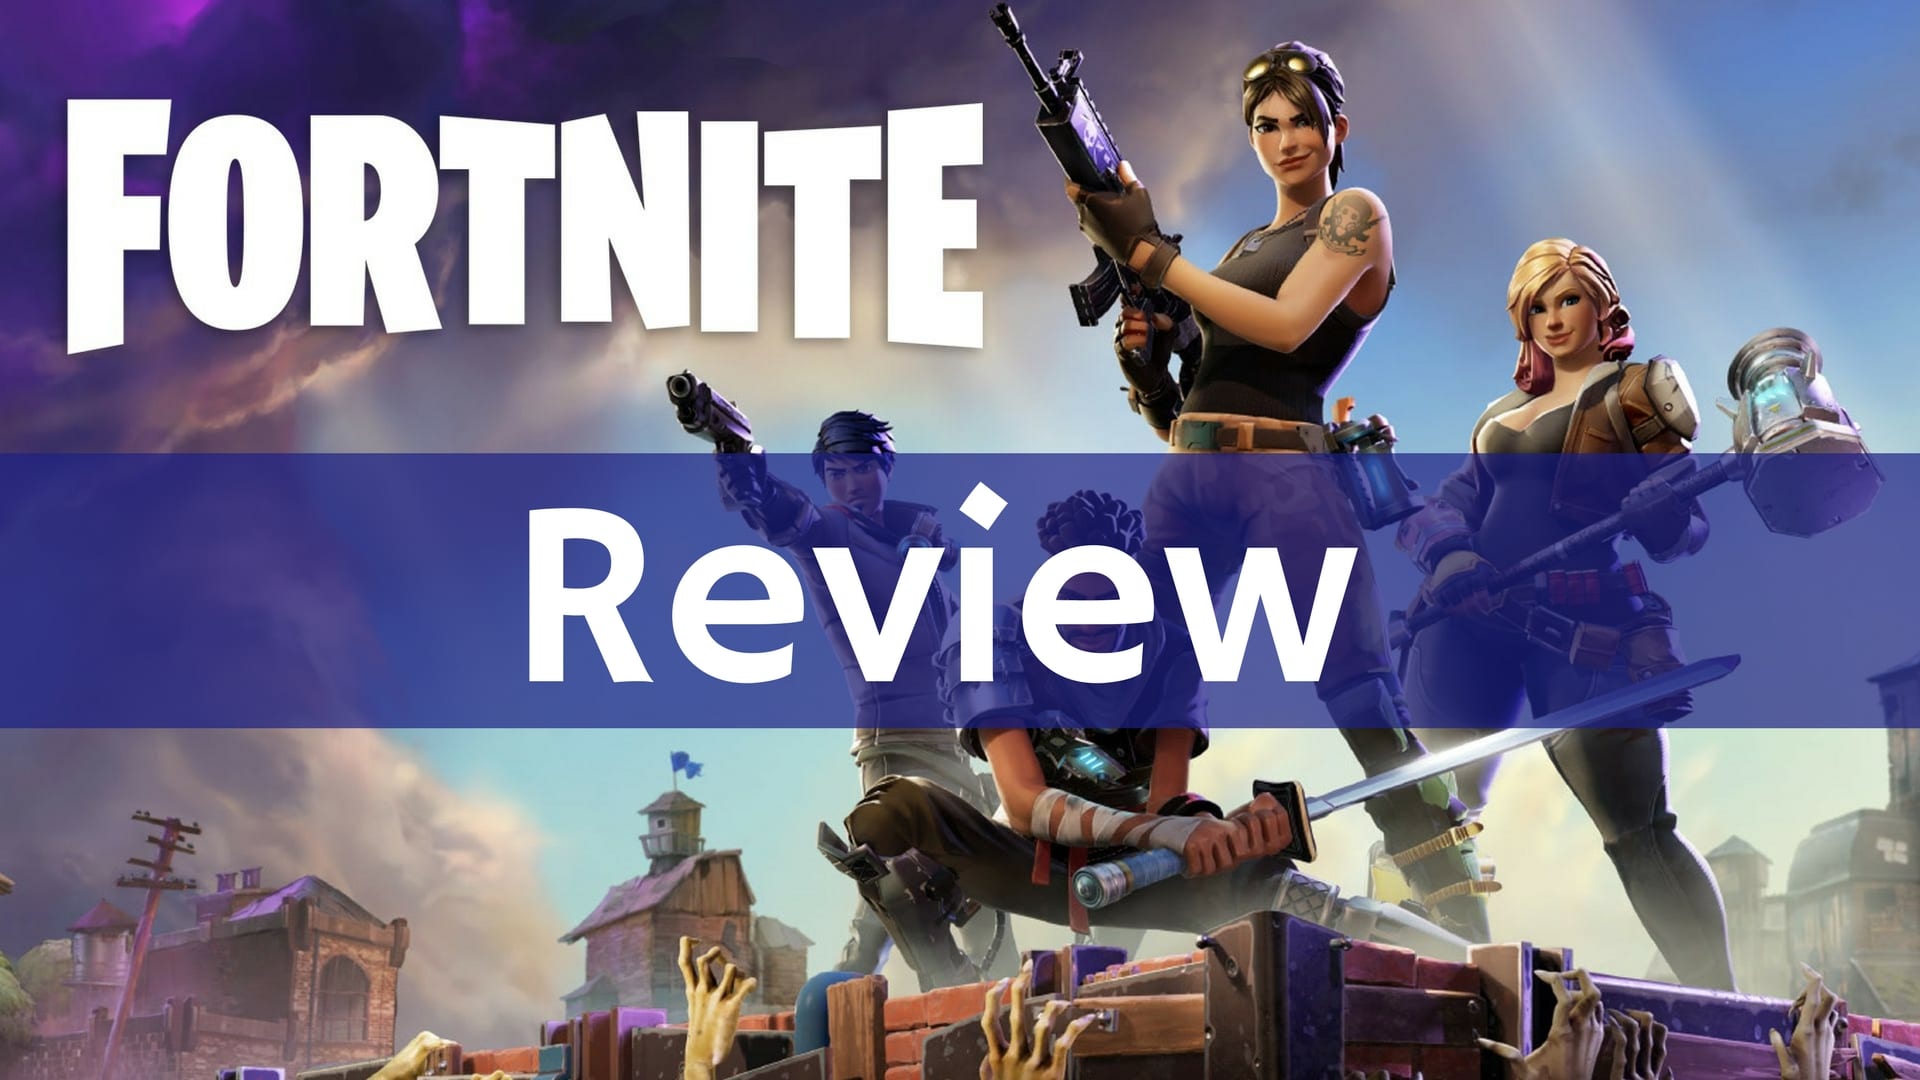 Review: Fortnite (Early Access) - PS4